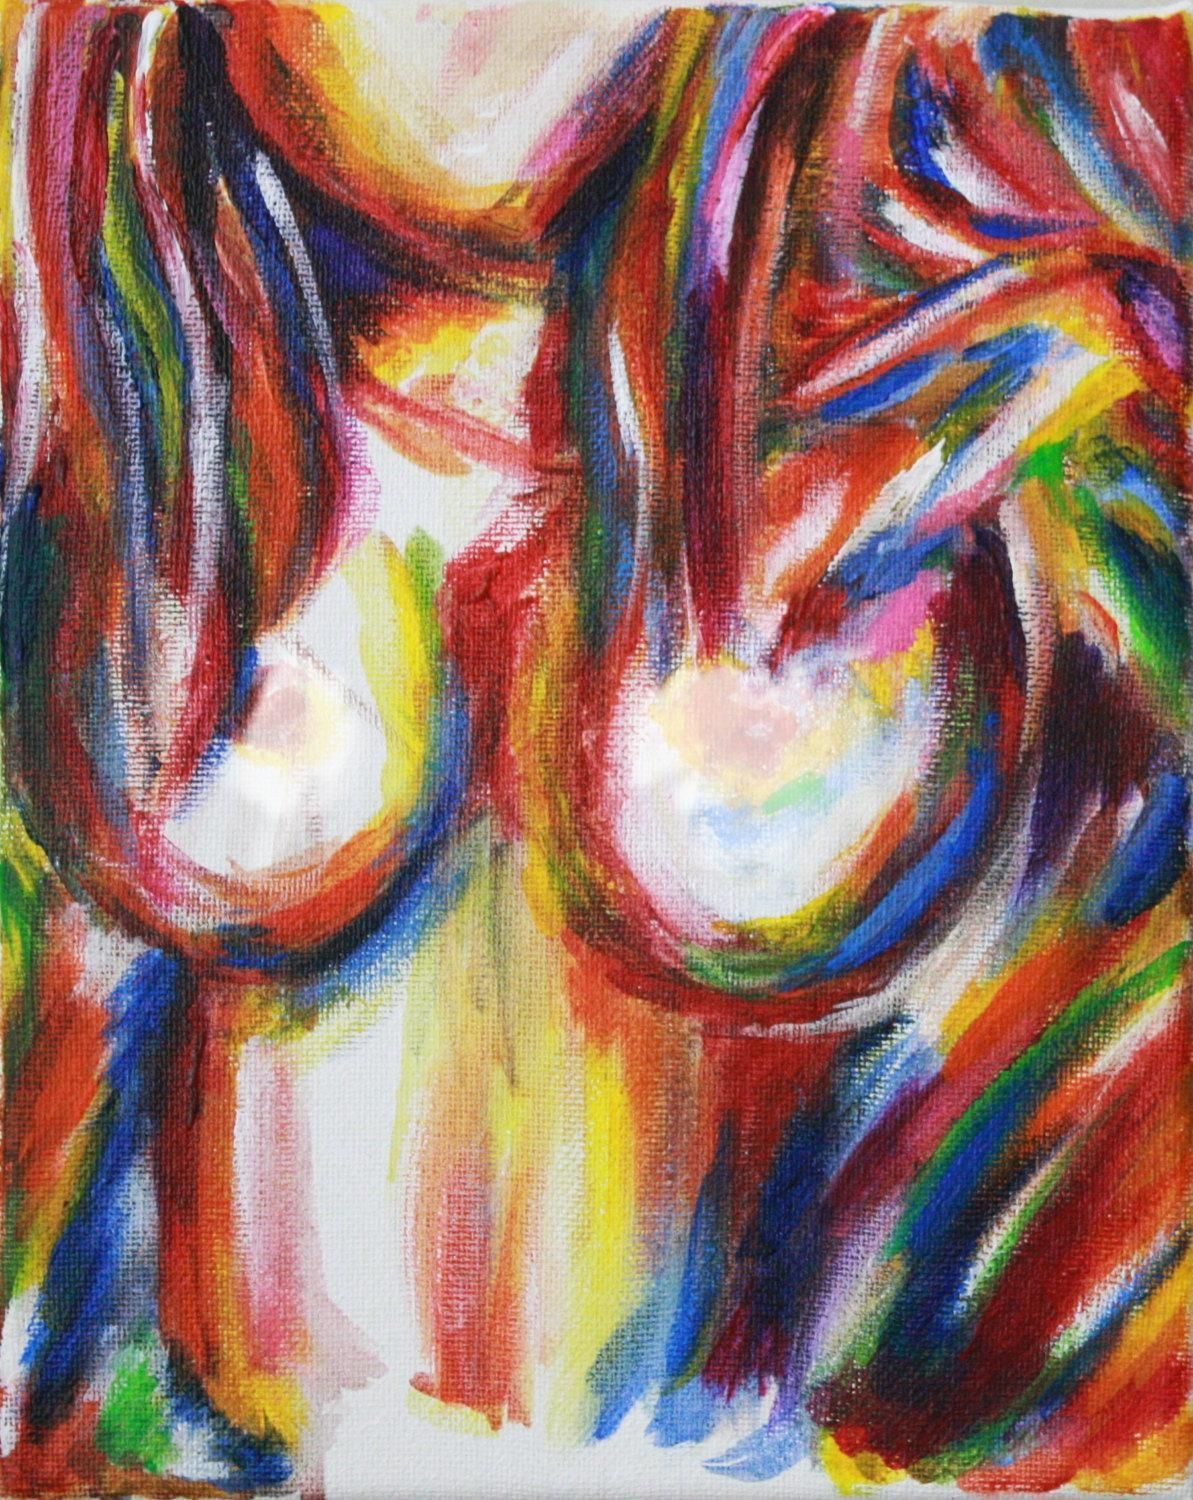 Nude Lady Abstract Painting Original Acrylic Painting With Regard To Sensual Wall Art (View 8 of 20)